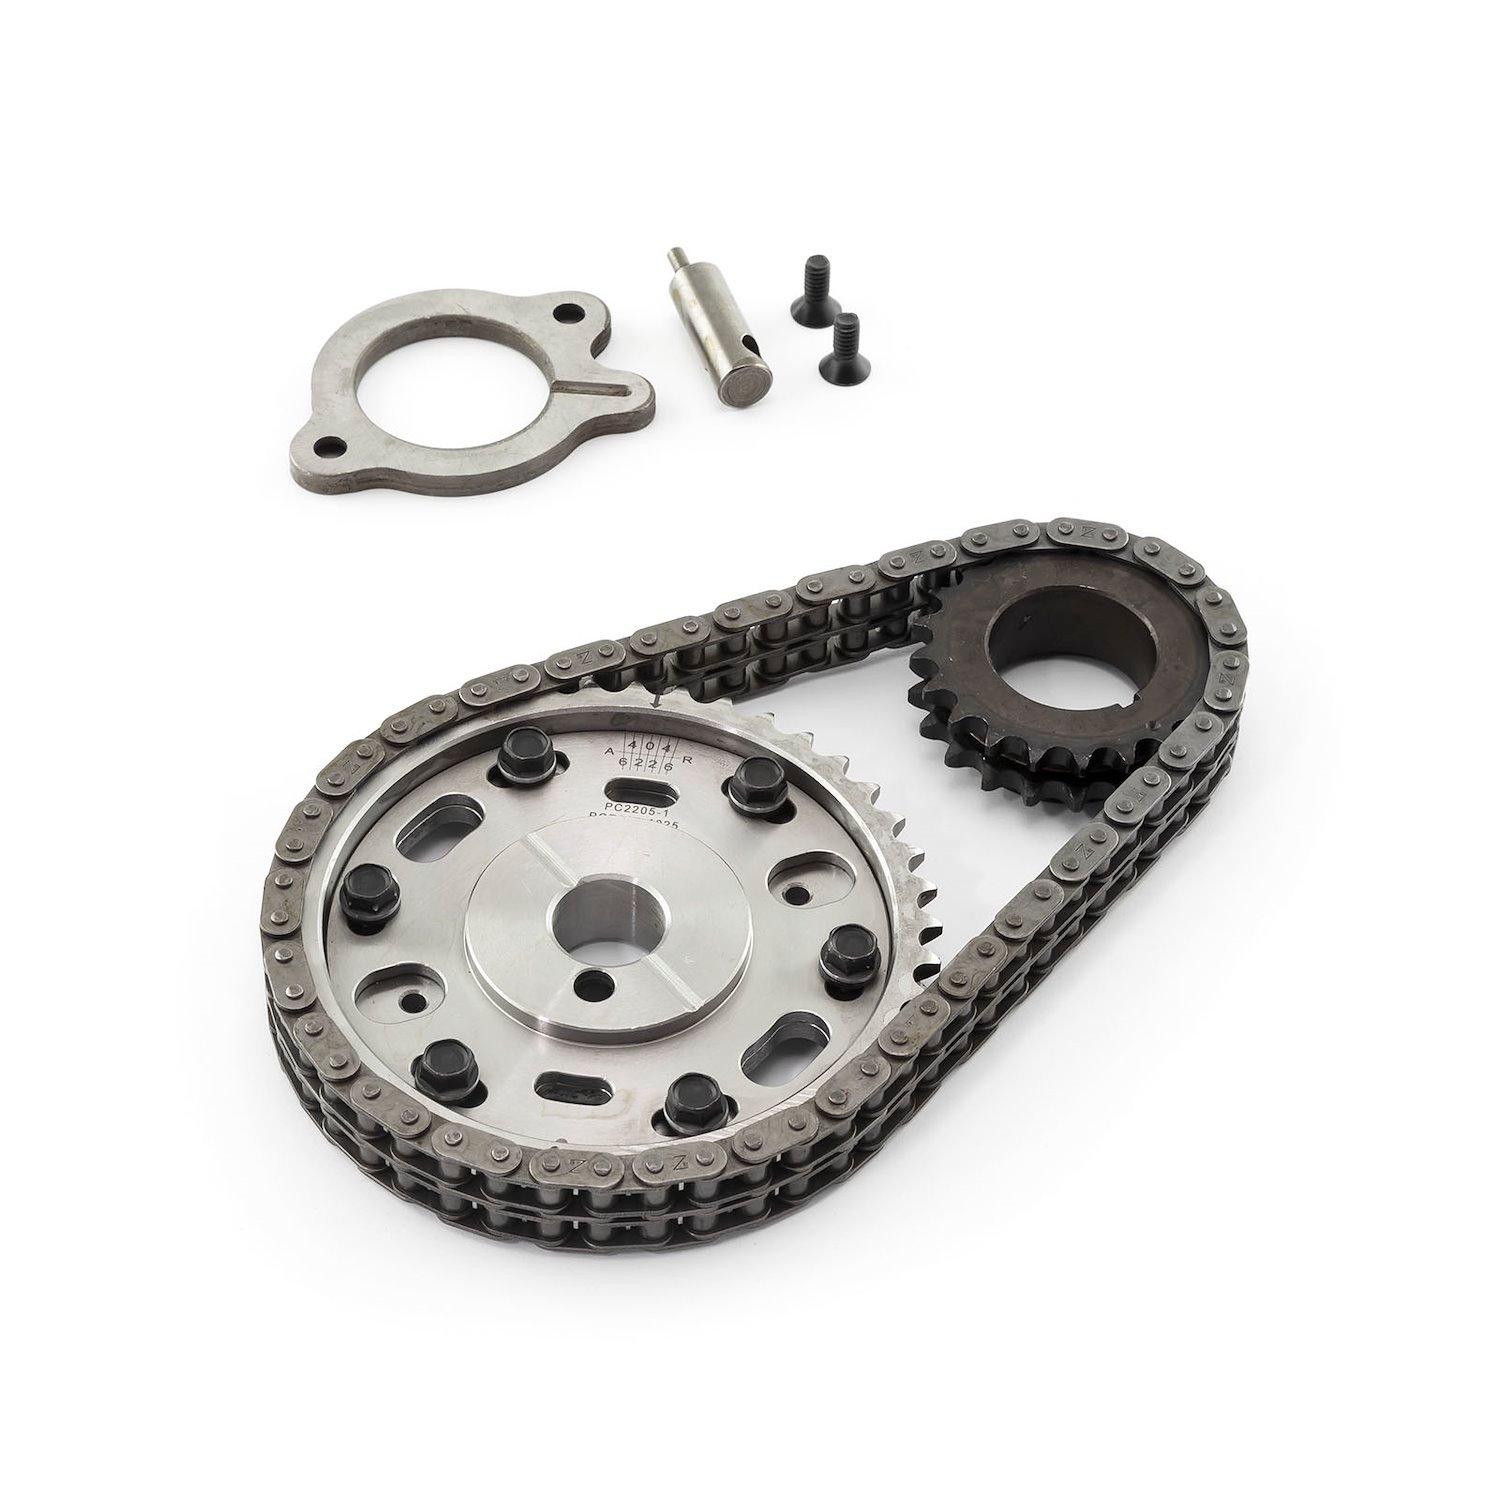 Double Roller Billet Steel Timing Chain Kit Small Block Ford 289/302